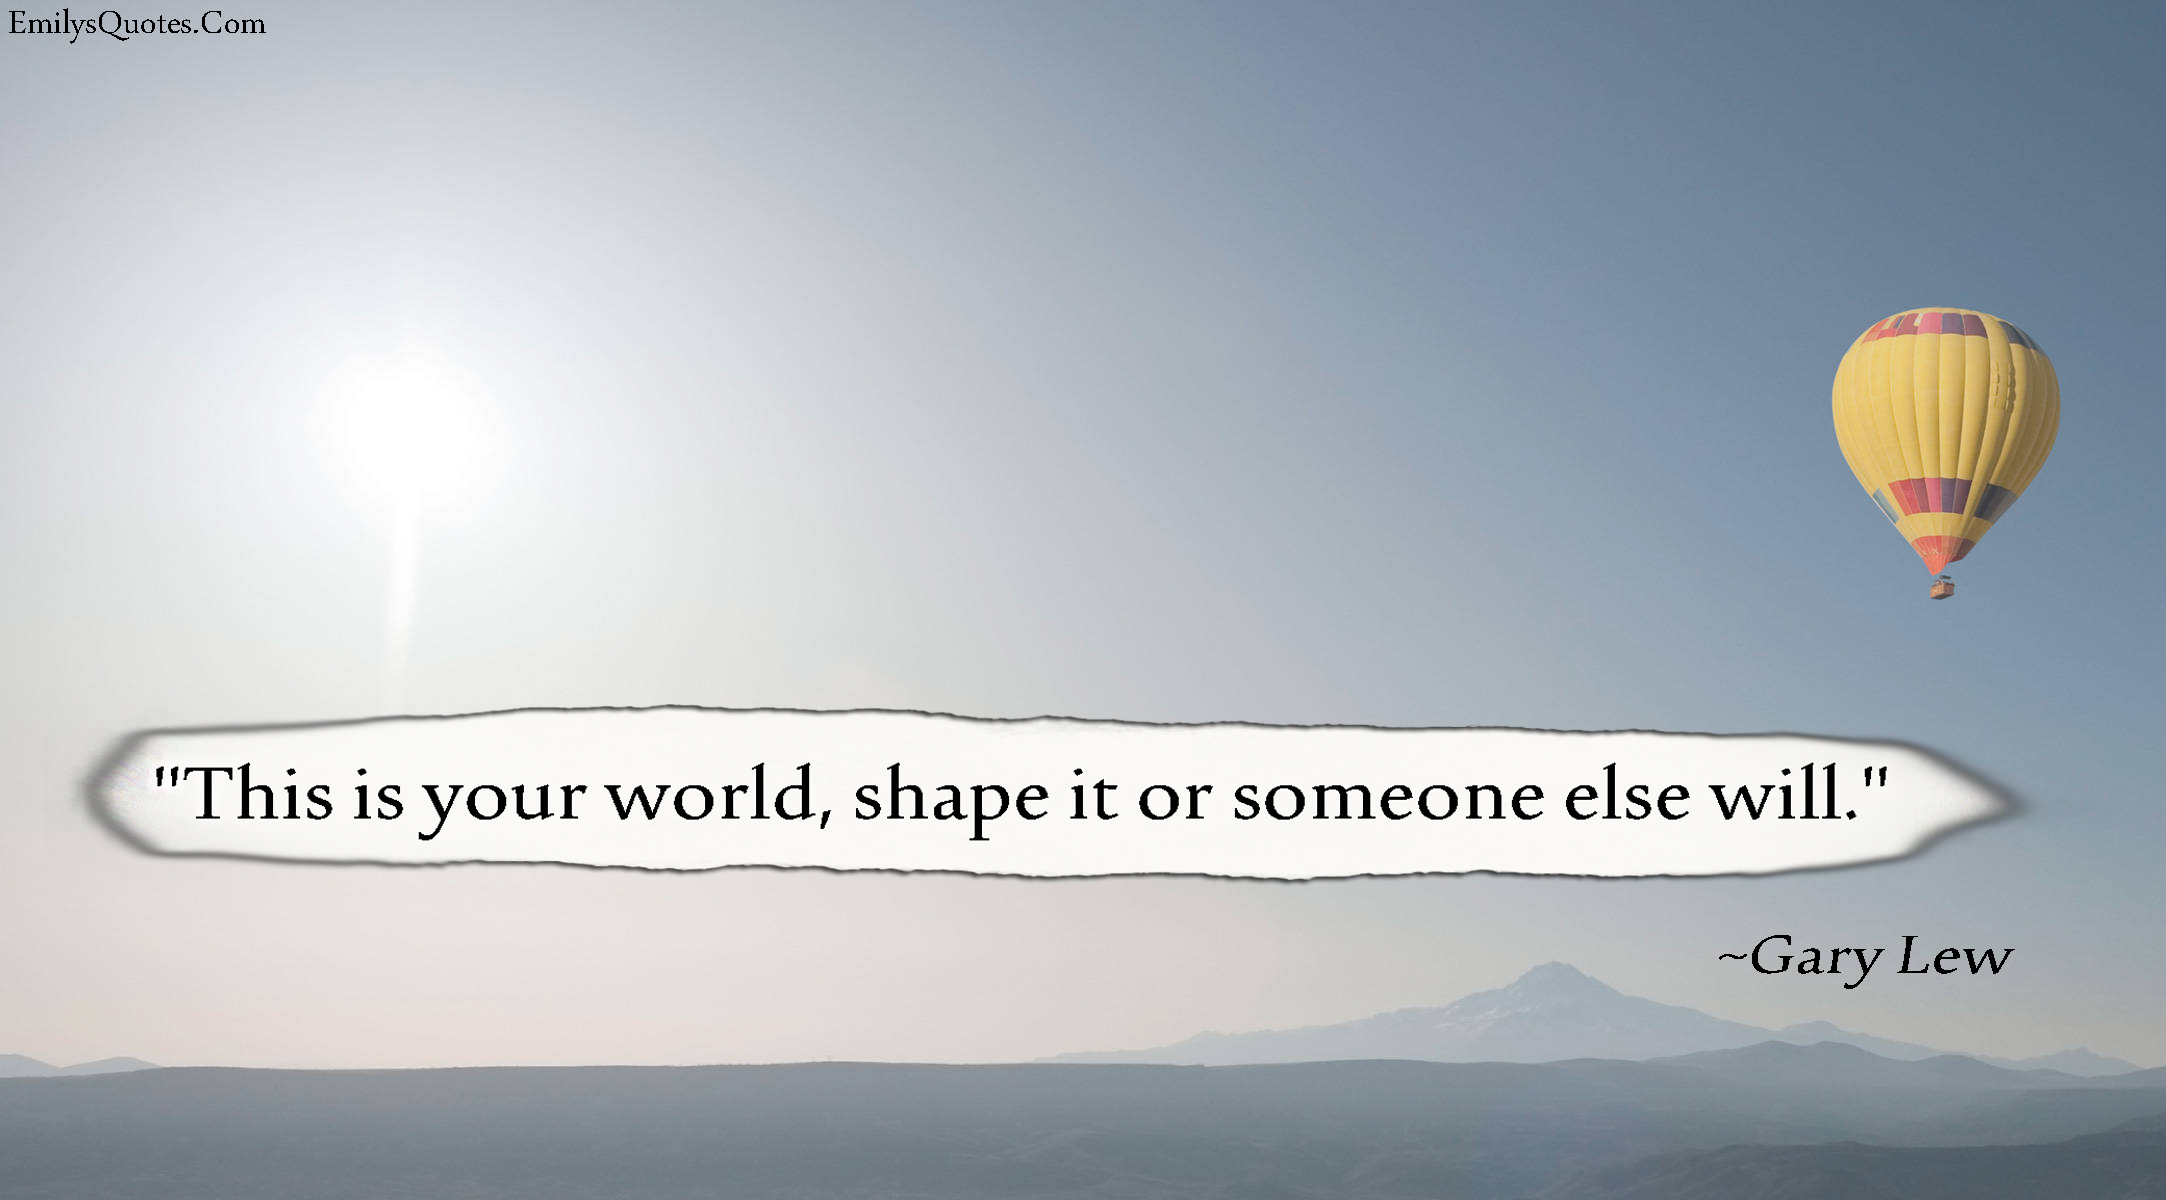 This is your world, shape it or someone else will